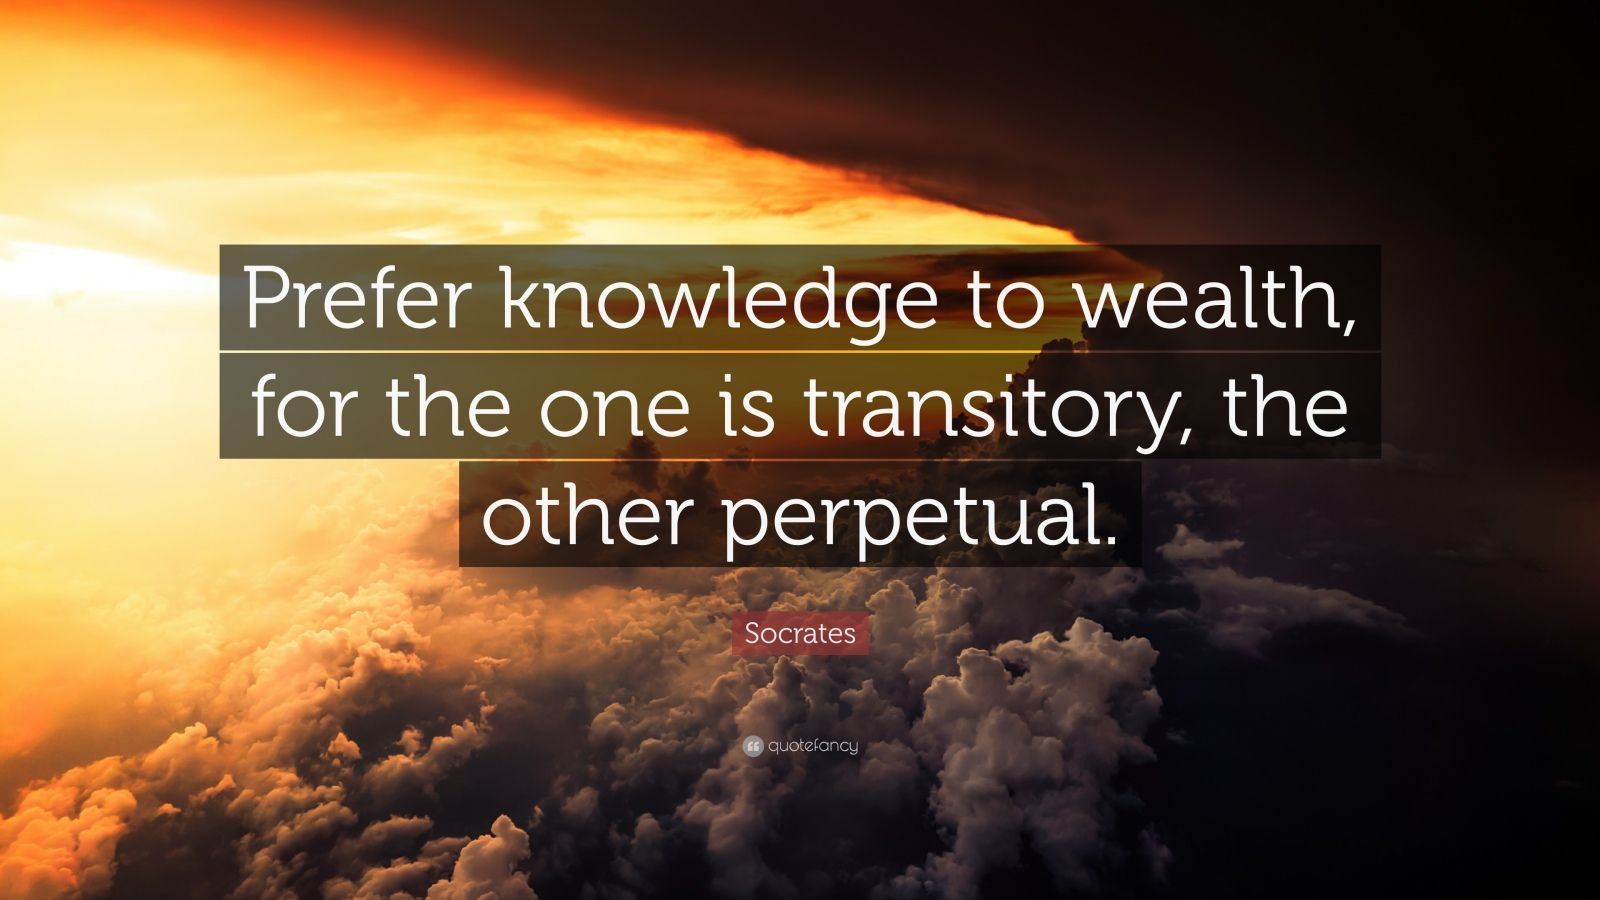 Socrates Quote: “Prefer knowledge to wealth, for the one is transitory